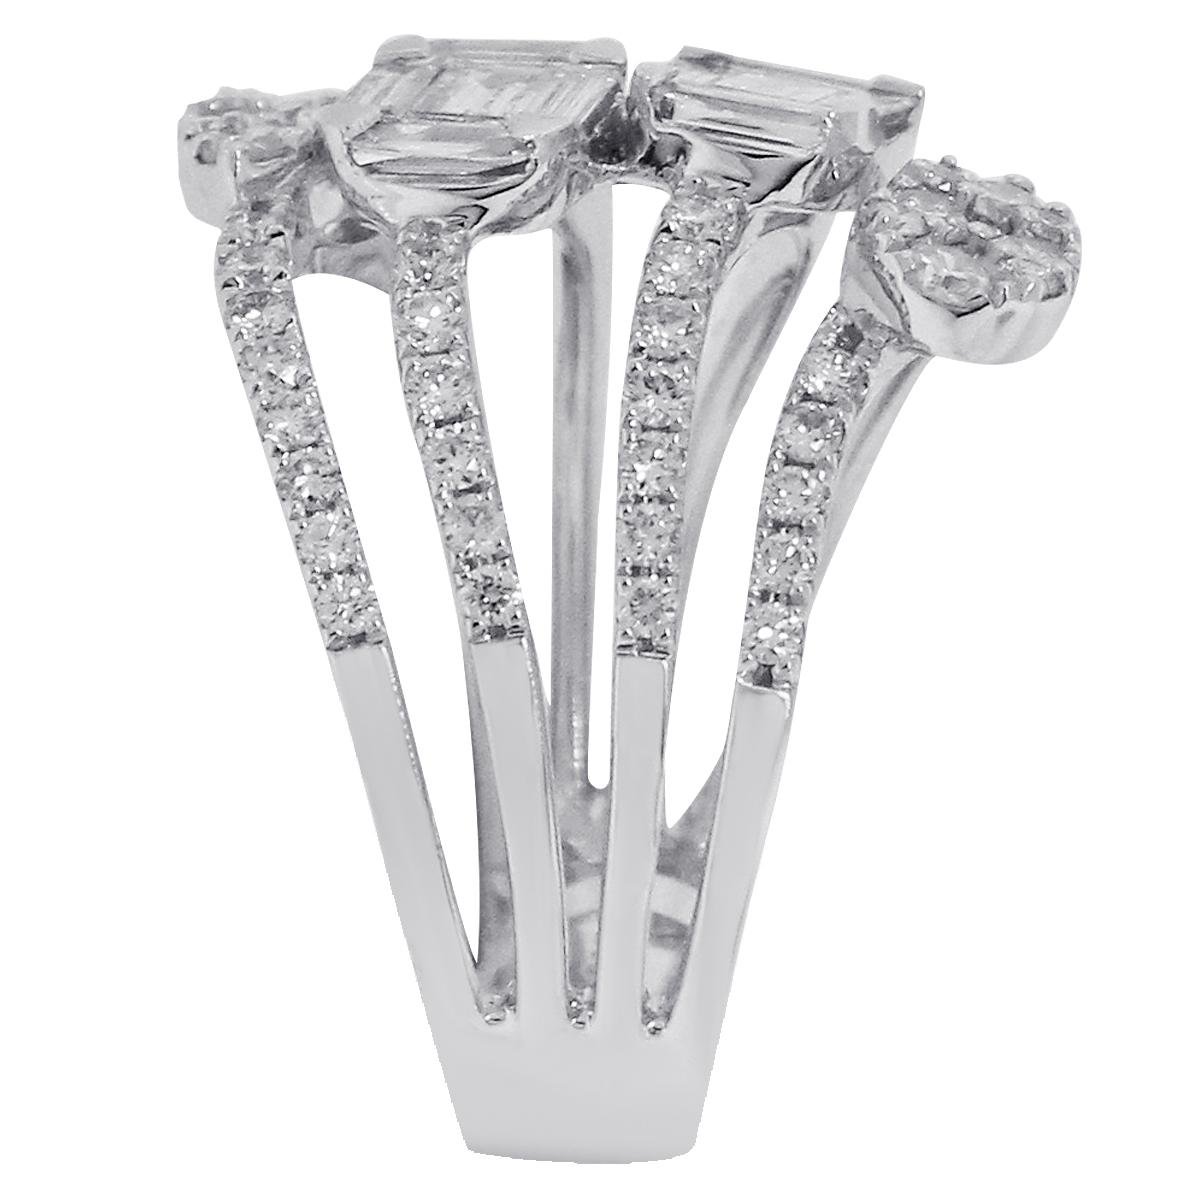 Material: 18k White Gold
Diamond Details: Approximately 1.74ctw round, pear and emerald cut diamonds. Diamonds are H in color and VS/SI1 in clarity.
Ring Size: 6.5 (can be sized)
Total Weight: 8.4g (5.4dwt)
Measurements: 0.75